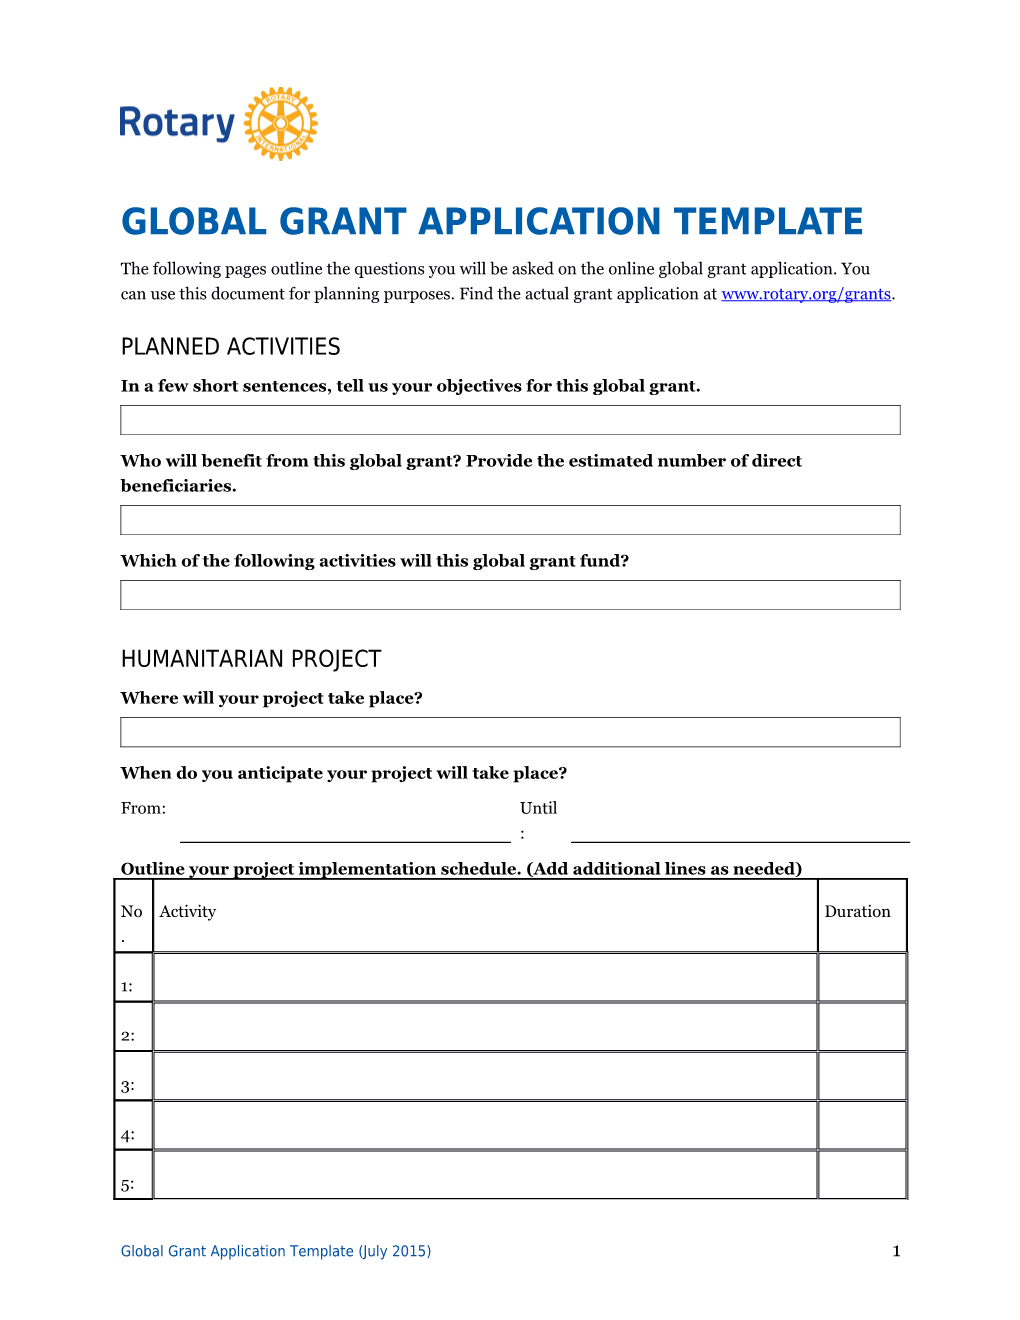 Global Grant Application Template